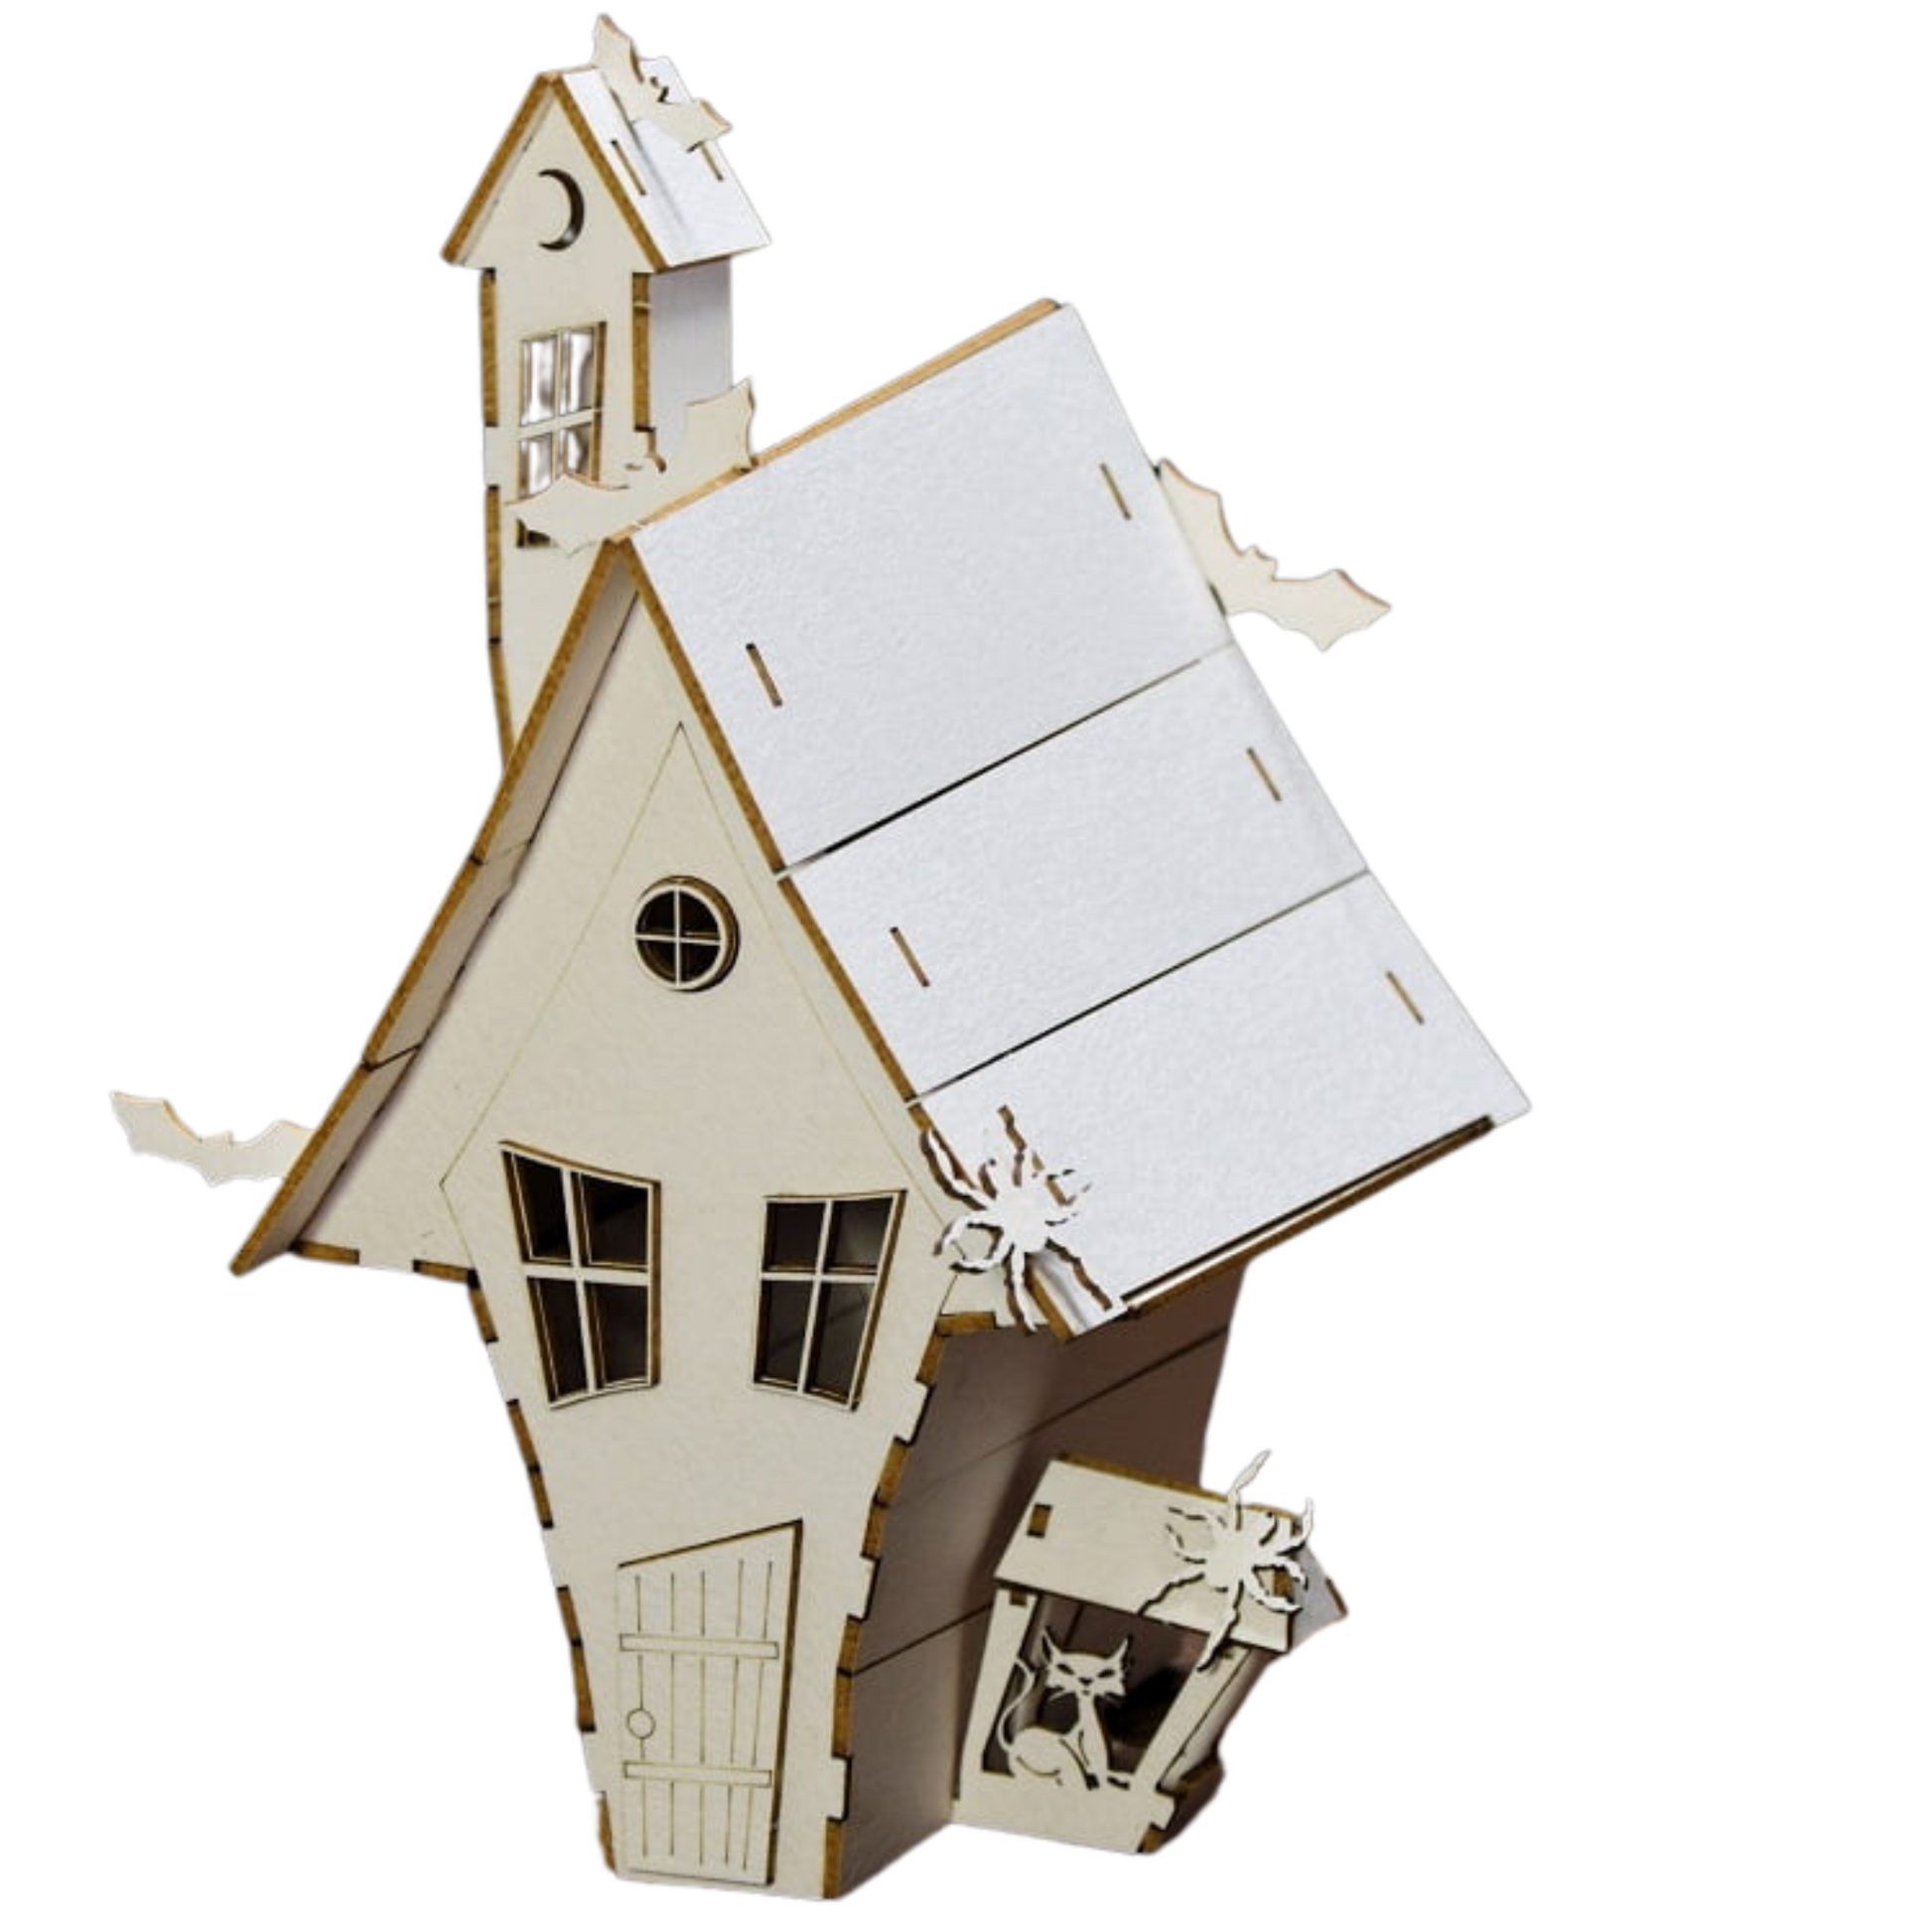 Witch Please Haunted House 3-D chipboard  from Snipart. This miniature modeling kit is Available at Milton's Daughter.